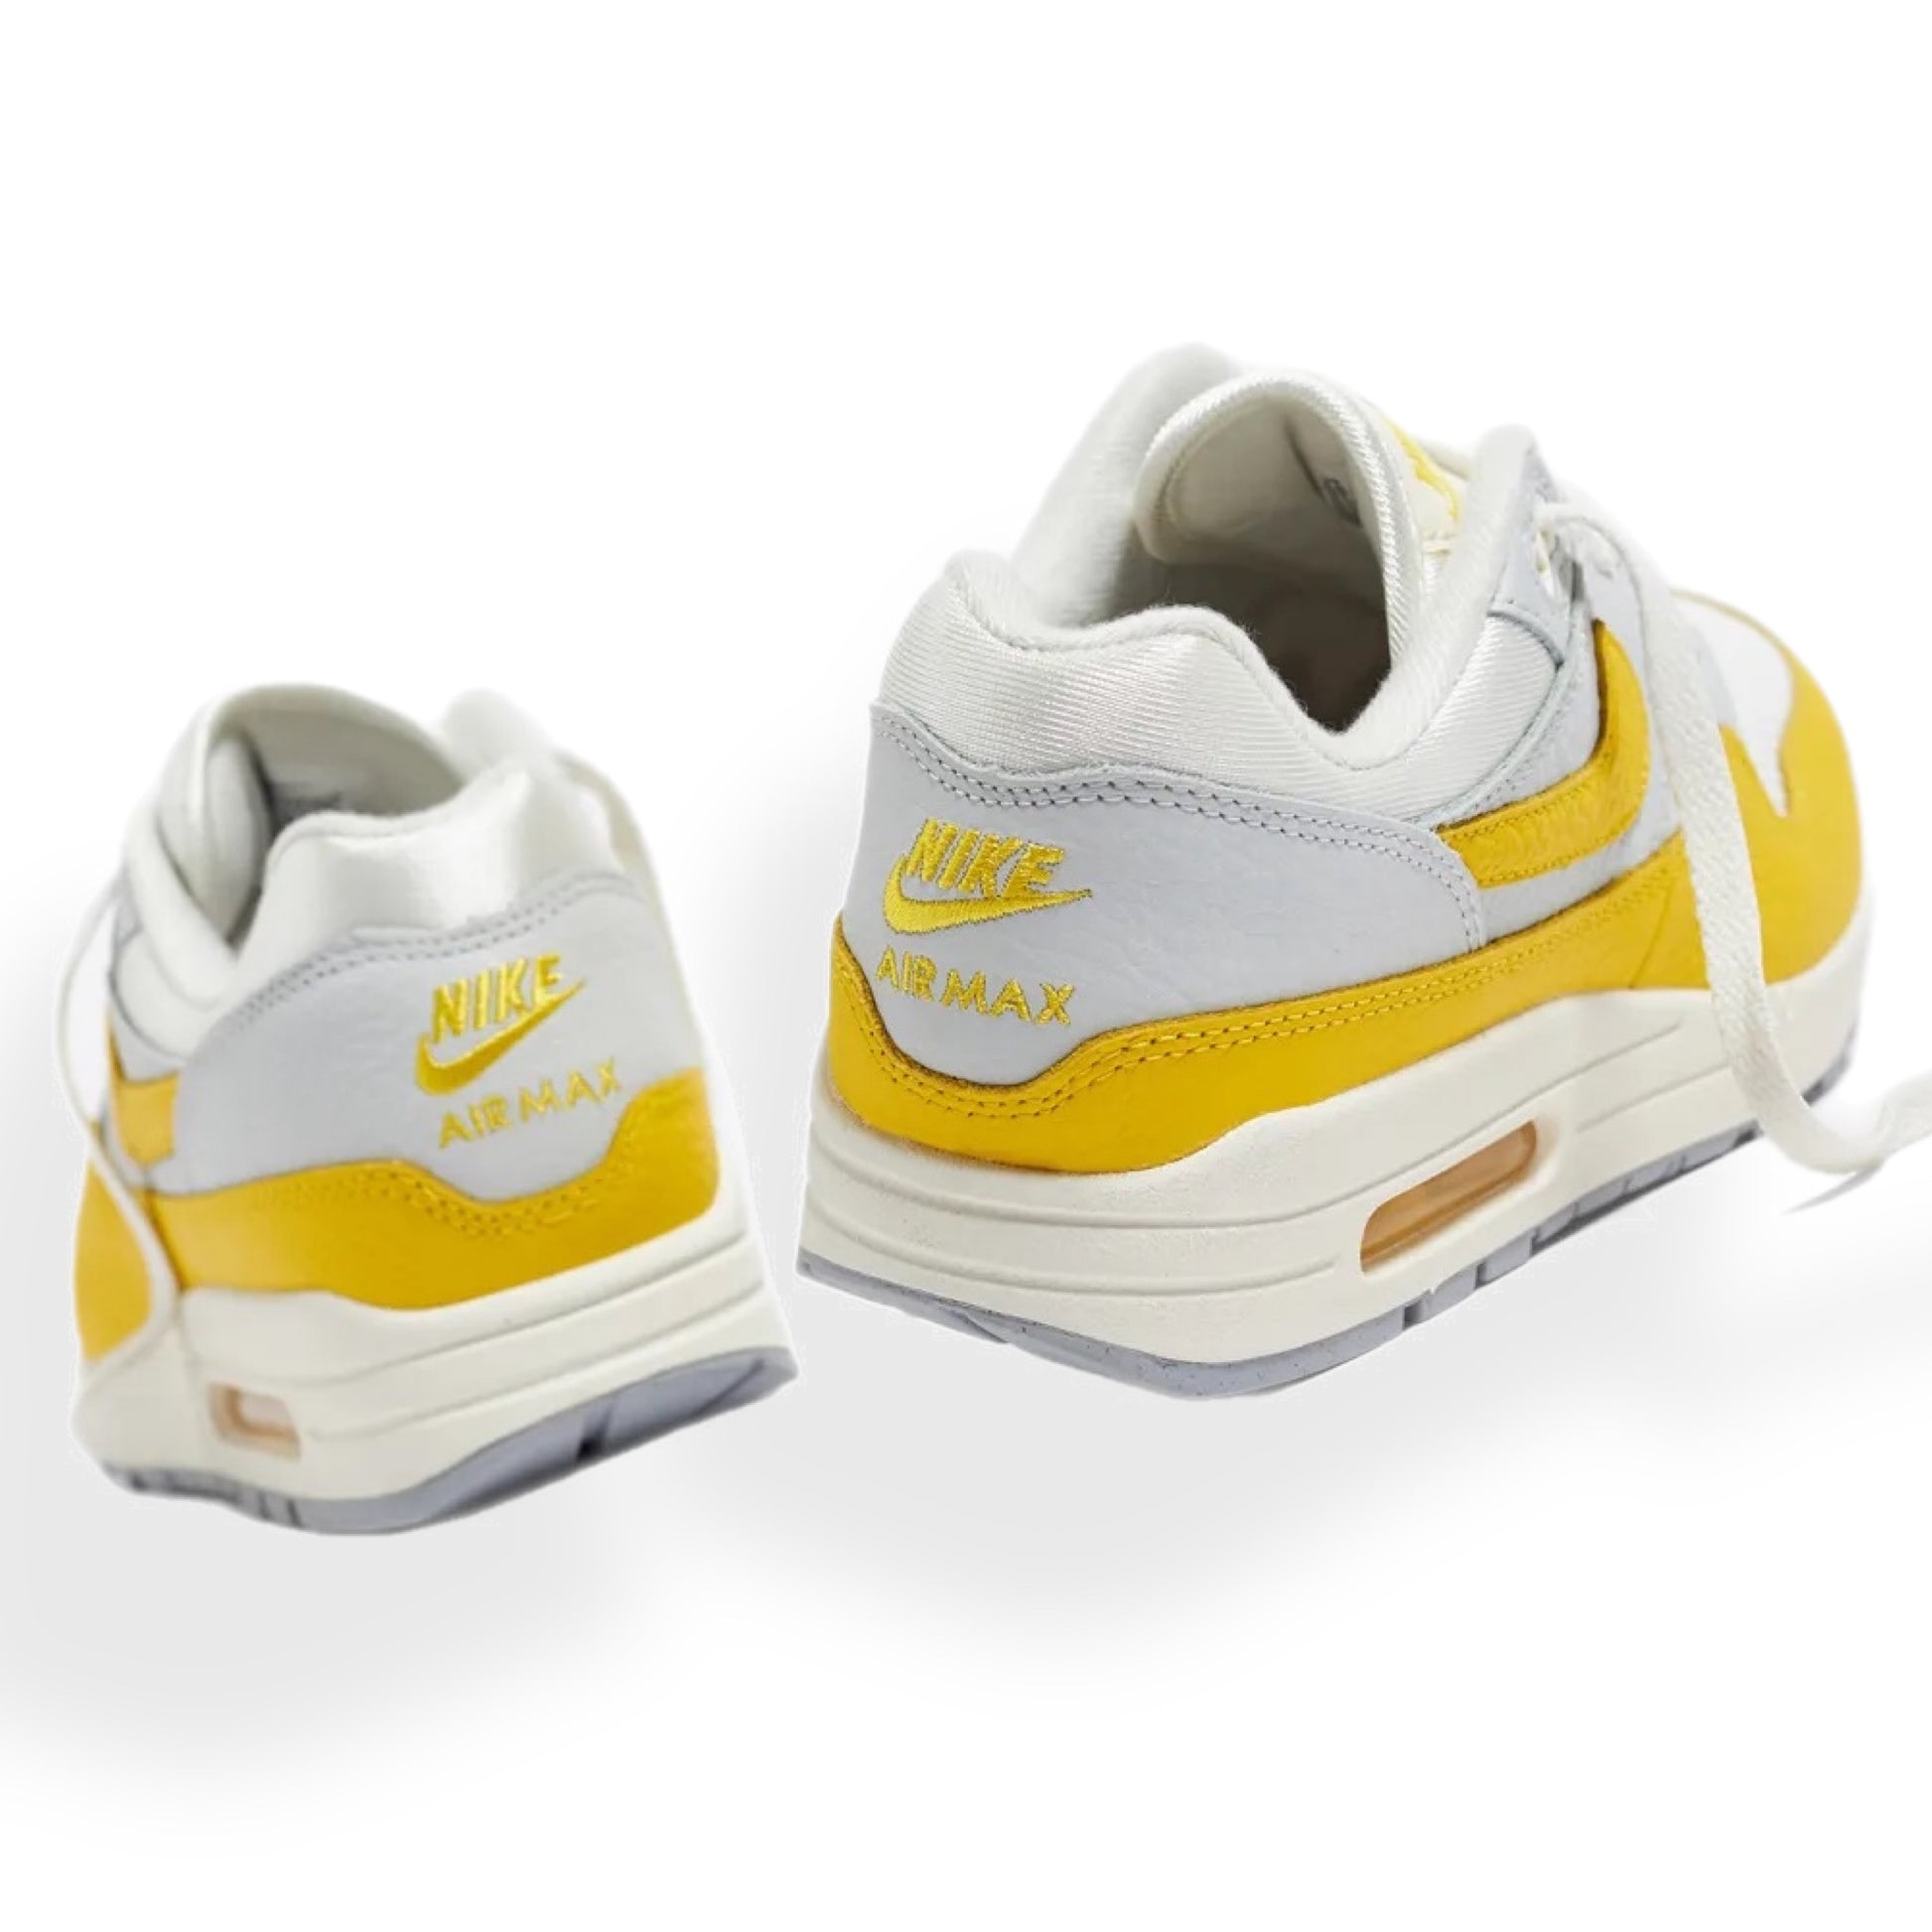 Contrast Clothing Worthing NIKE AIR MAX ! TOUR YELLOW sneakers